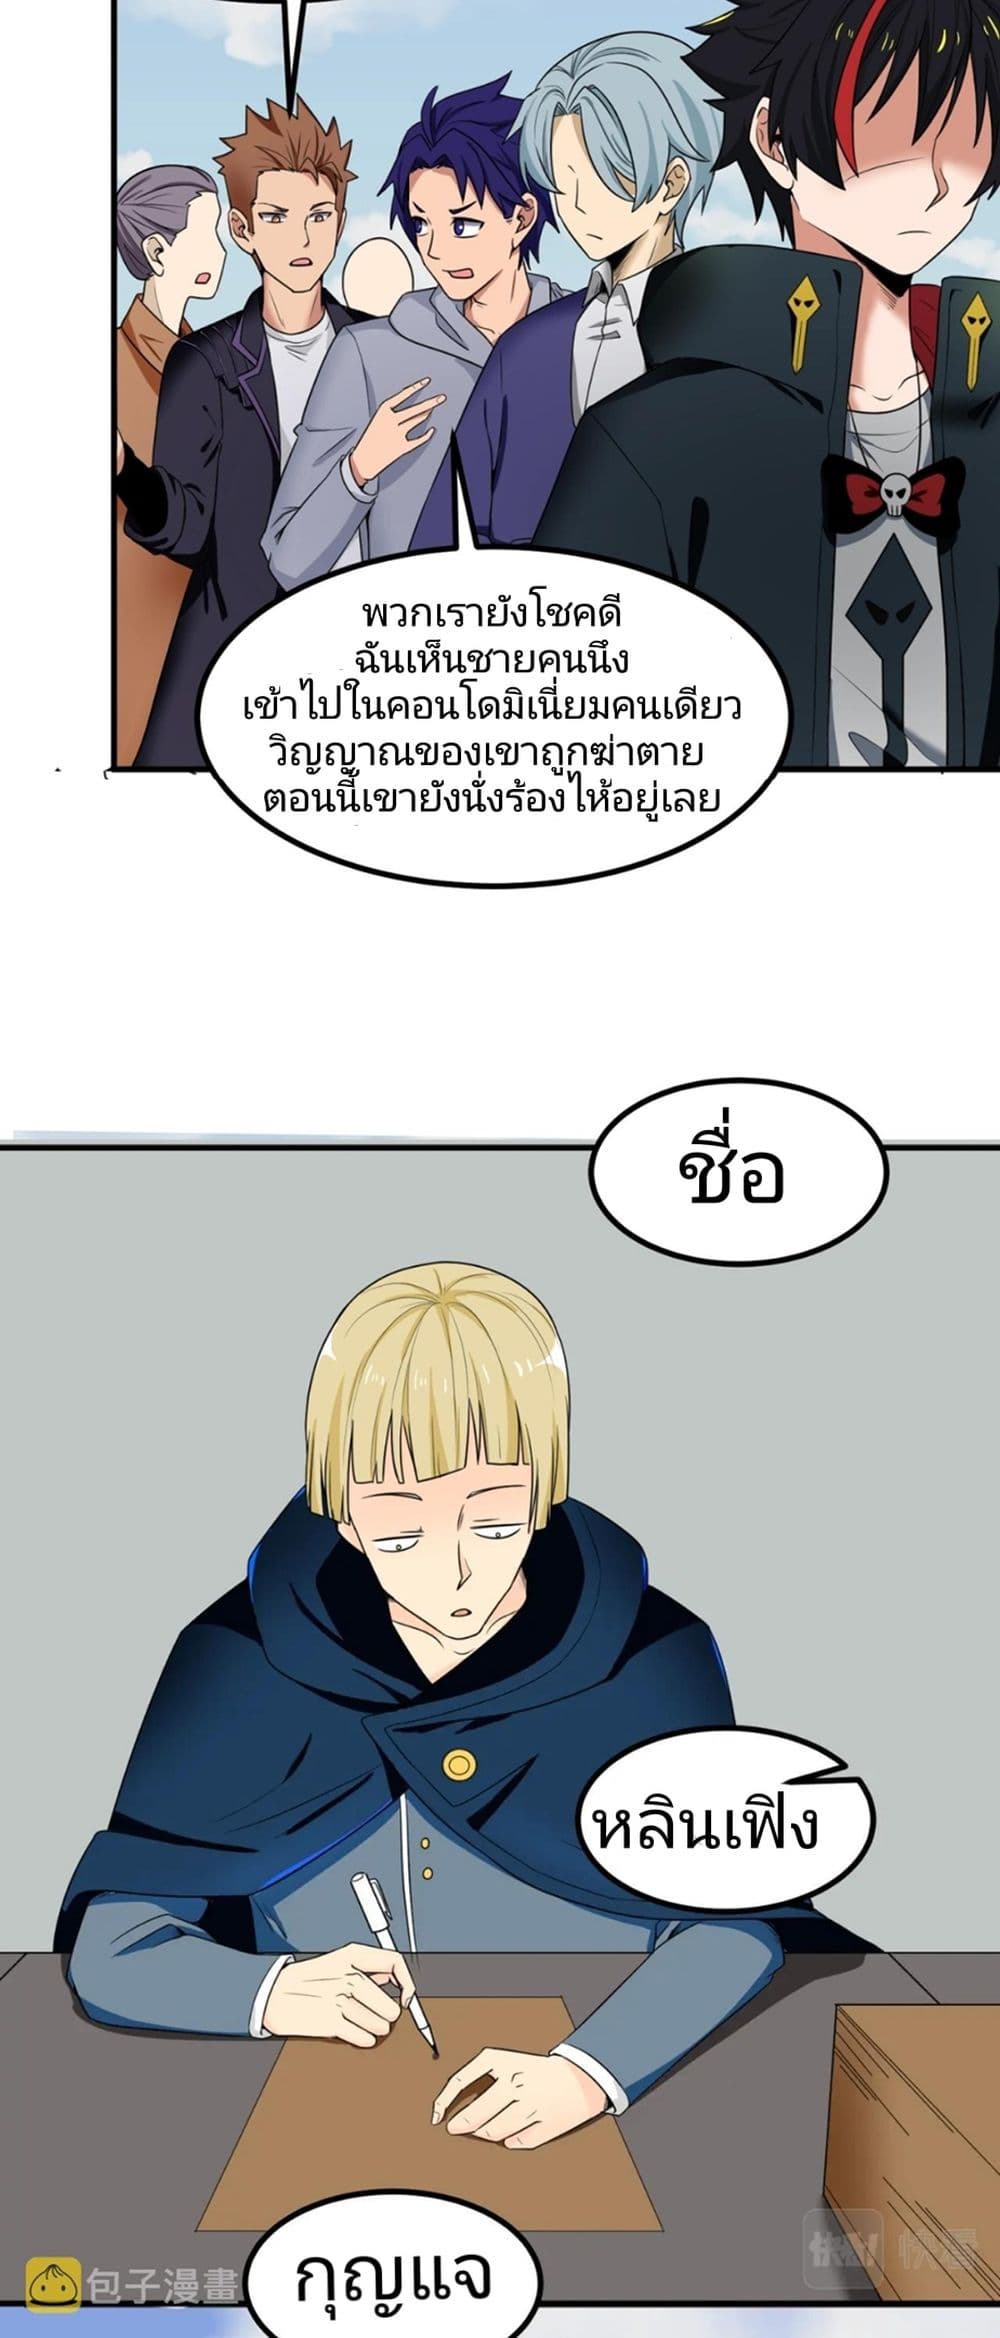 The Age of Ghost Spirits à¸à¸­à¸à¸à¸µà¹ 5 (45)